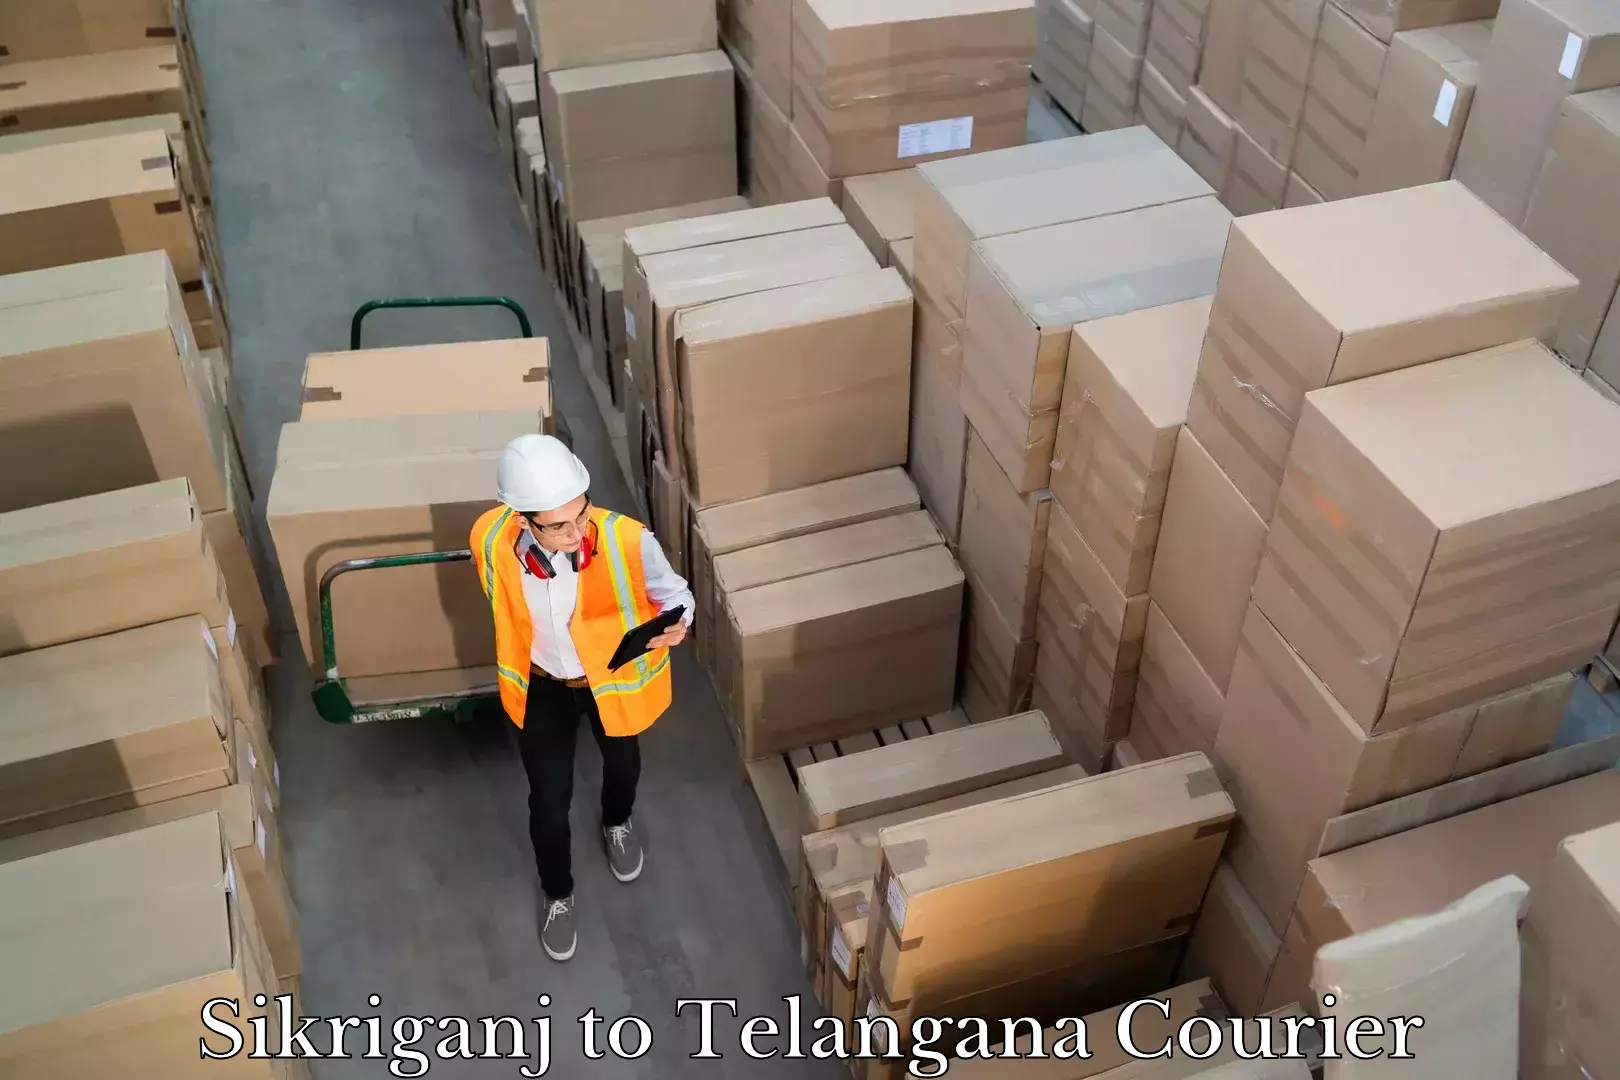 Courier service efficiency Sikriganj to Telangana